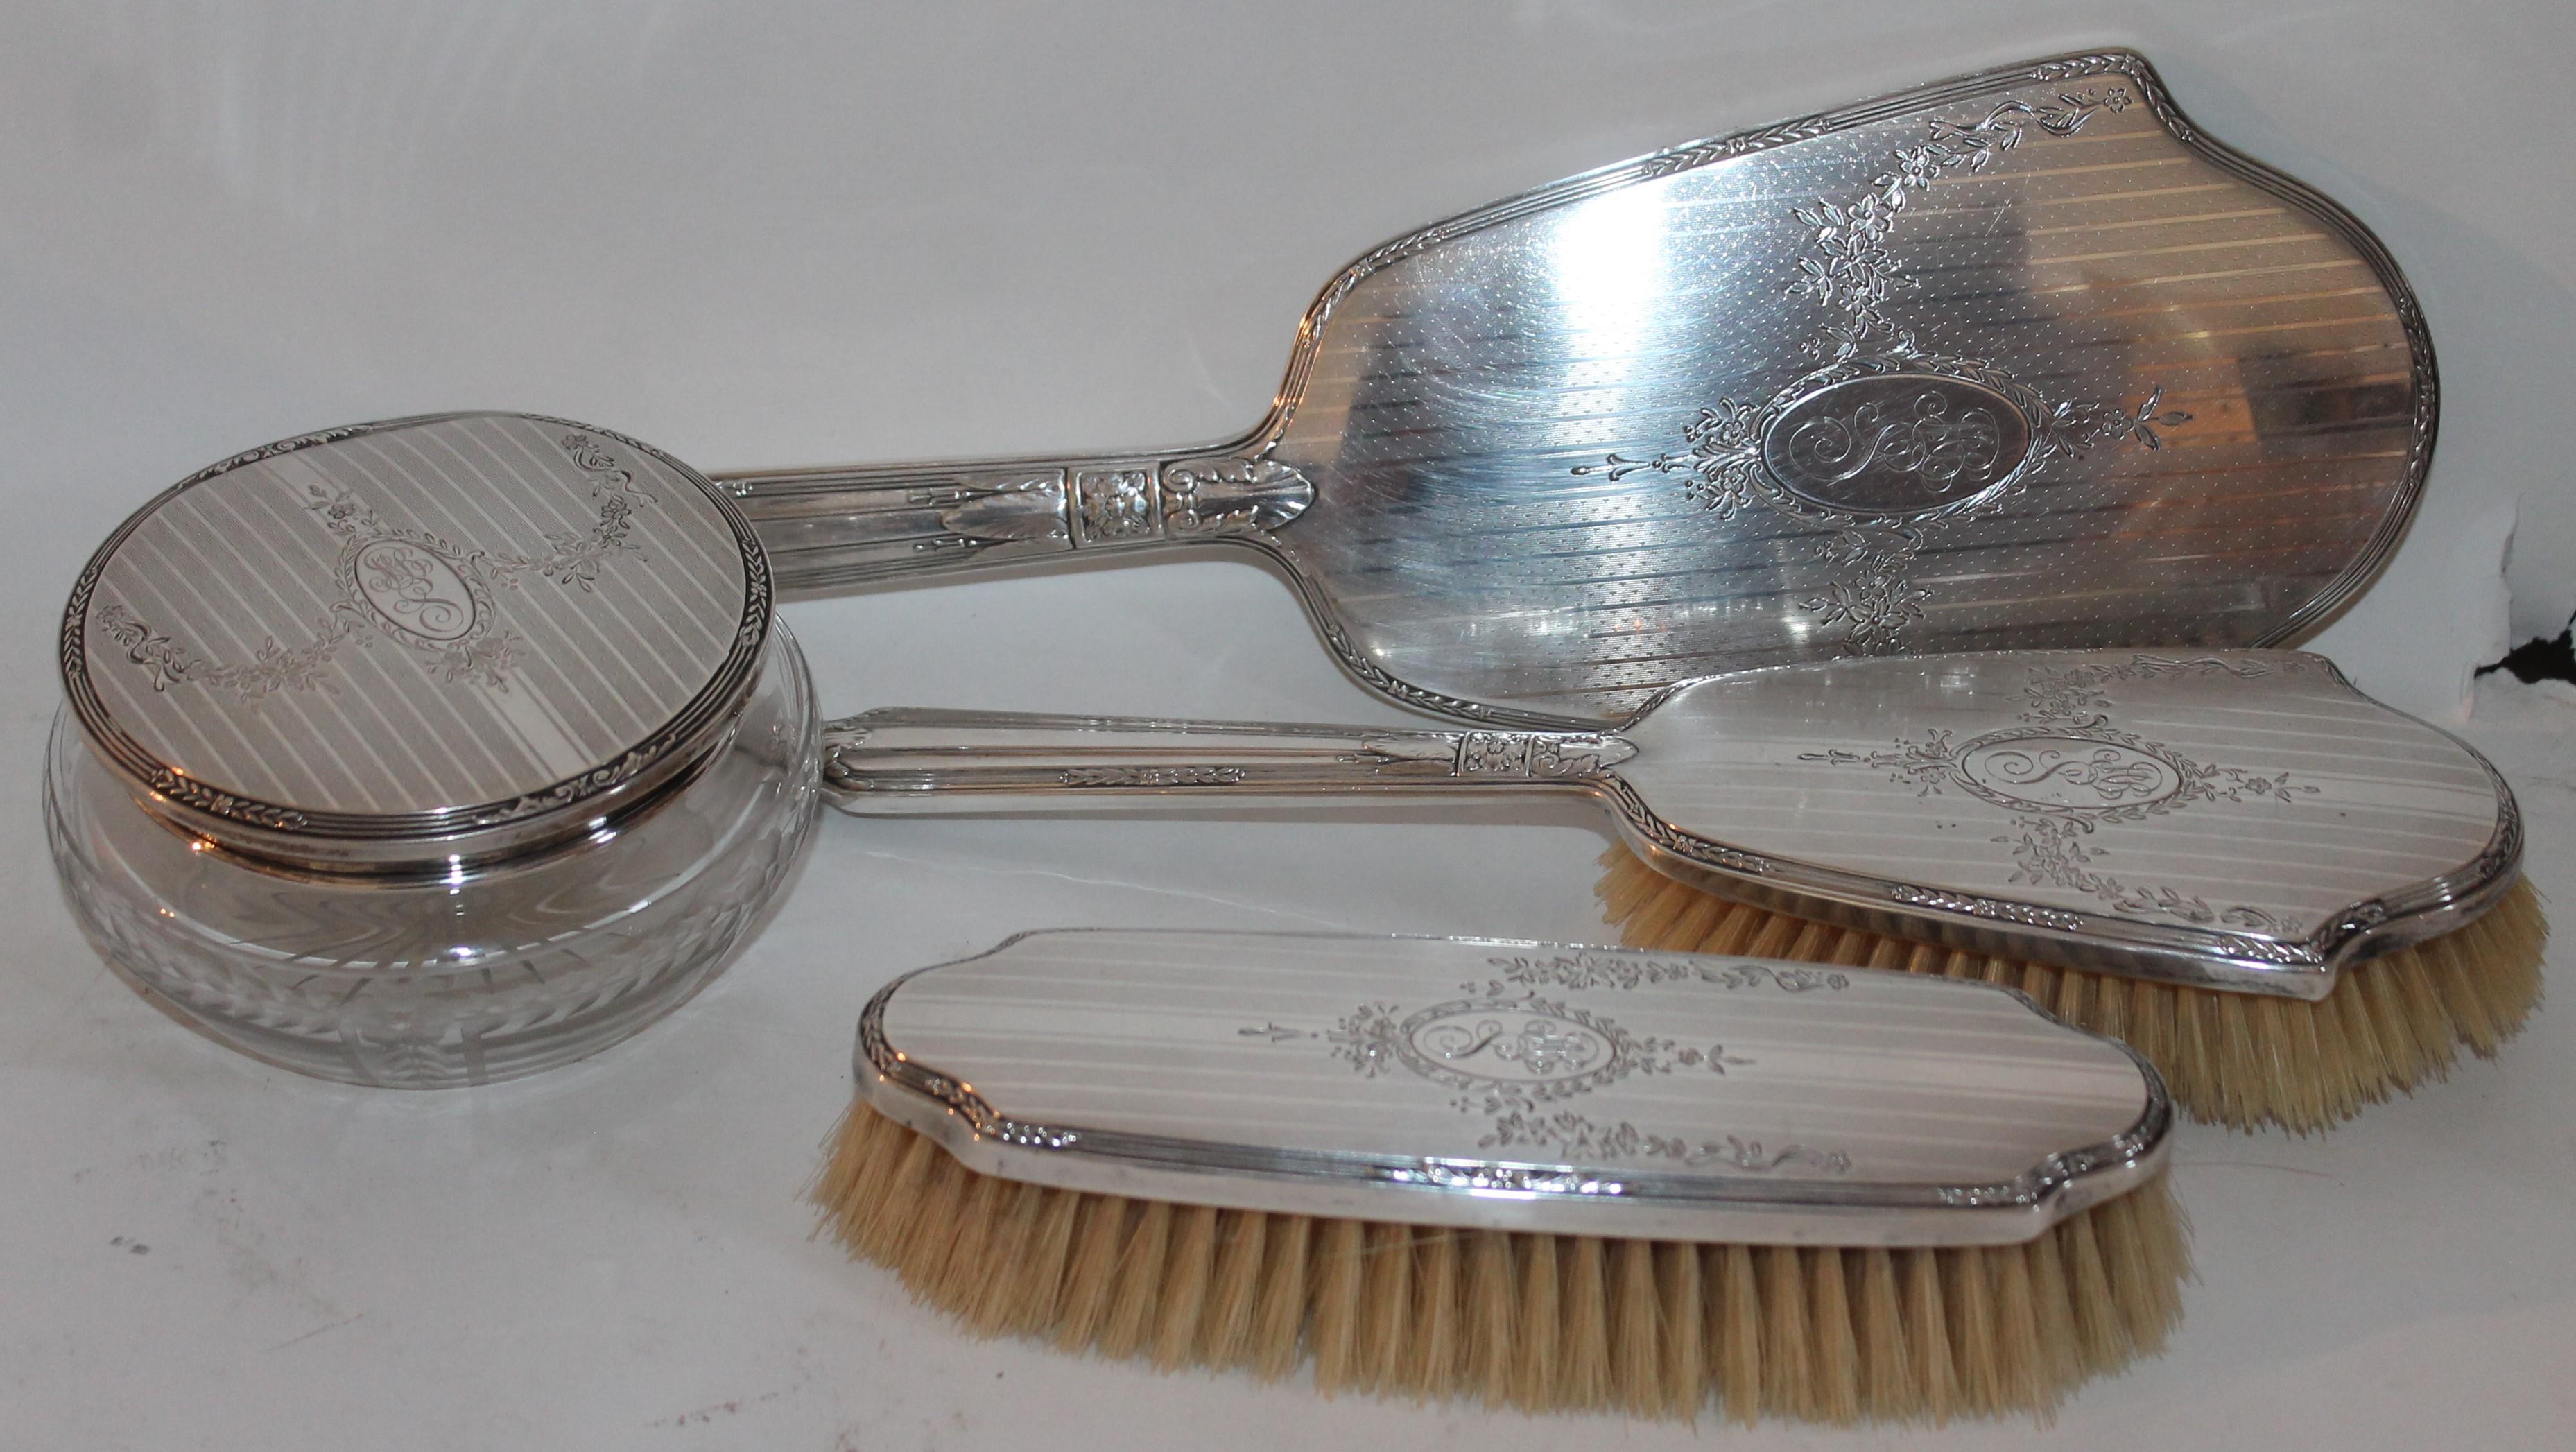 Measurements are as follows - Signed Alvin sterling silver vanity set in very good condition. This four piece set is in fine condition.
Measures: 3 x 7.5 x 1.5 brush
10.5 x 3.5 x 1.5 brush with handle
14.5 x 4 x 1 mirror
4.75 x 2.25 jar.